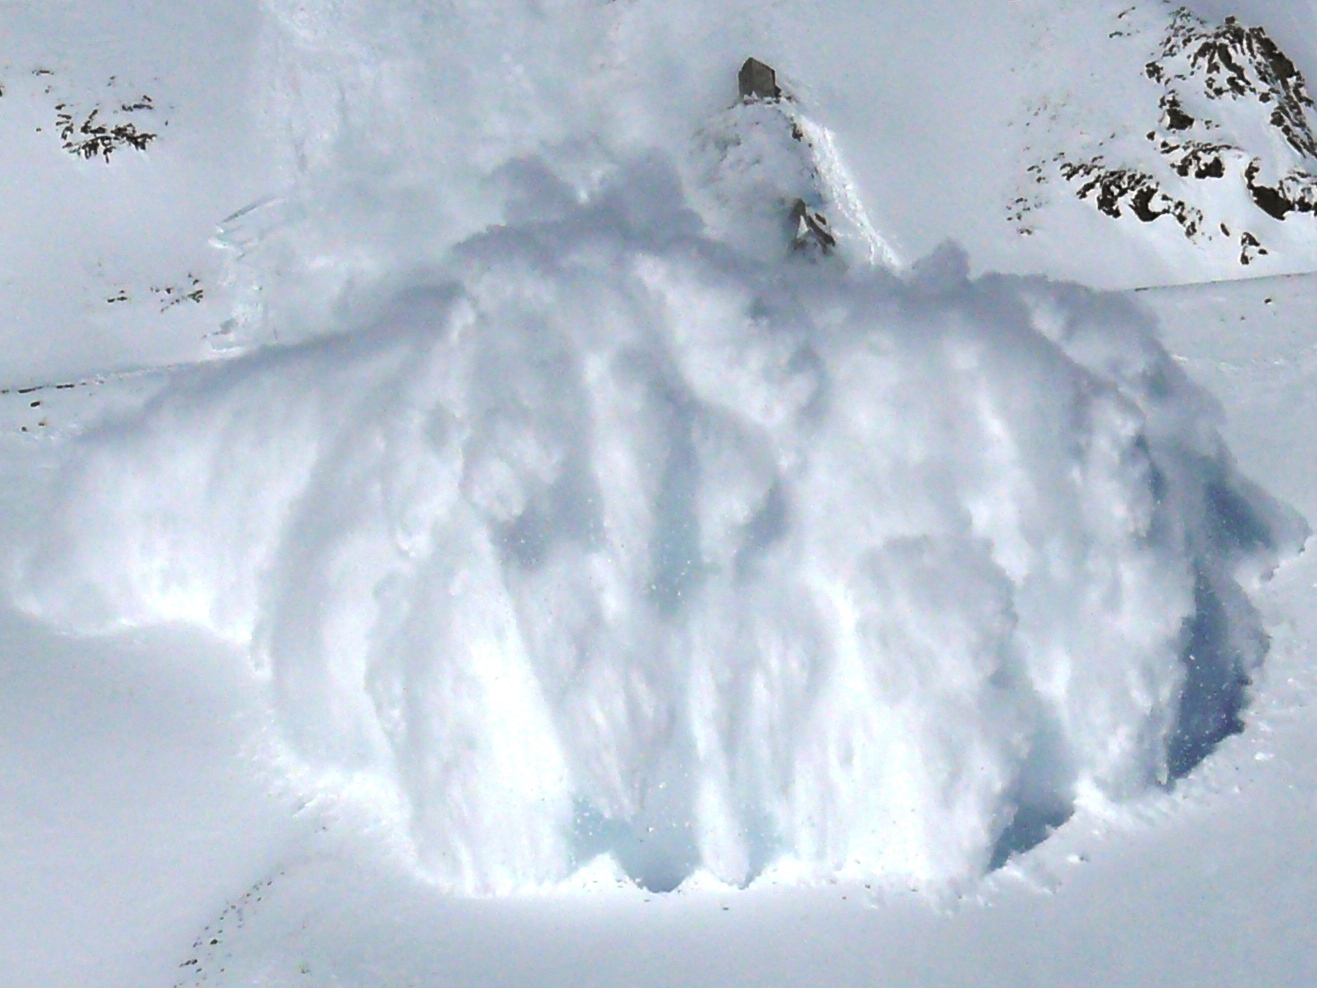 Using seismic measuring devices to record avalanches